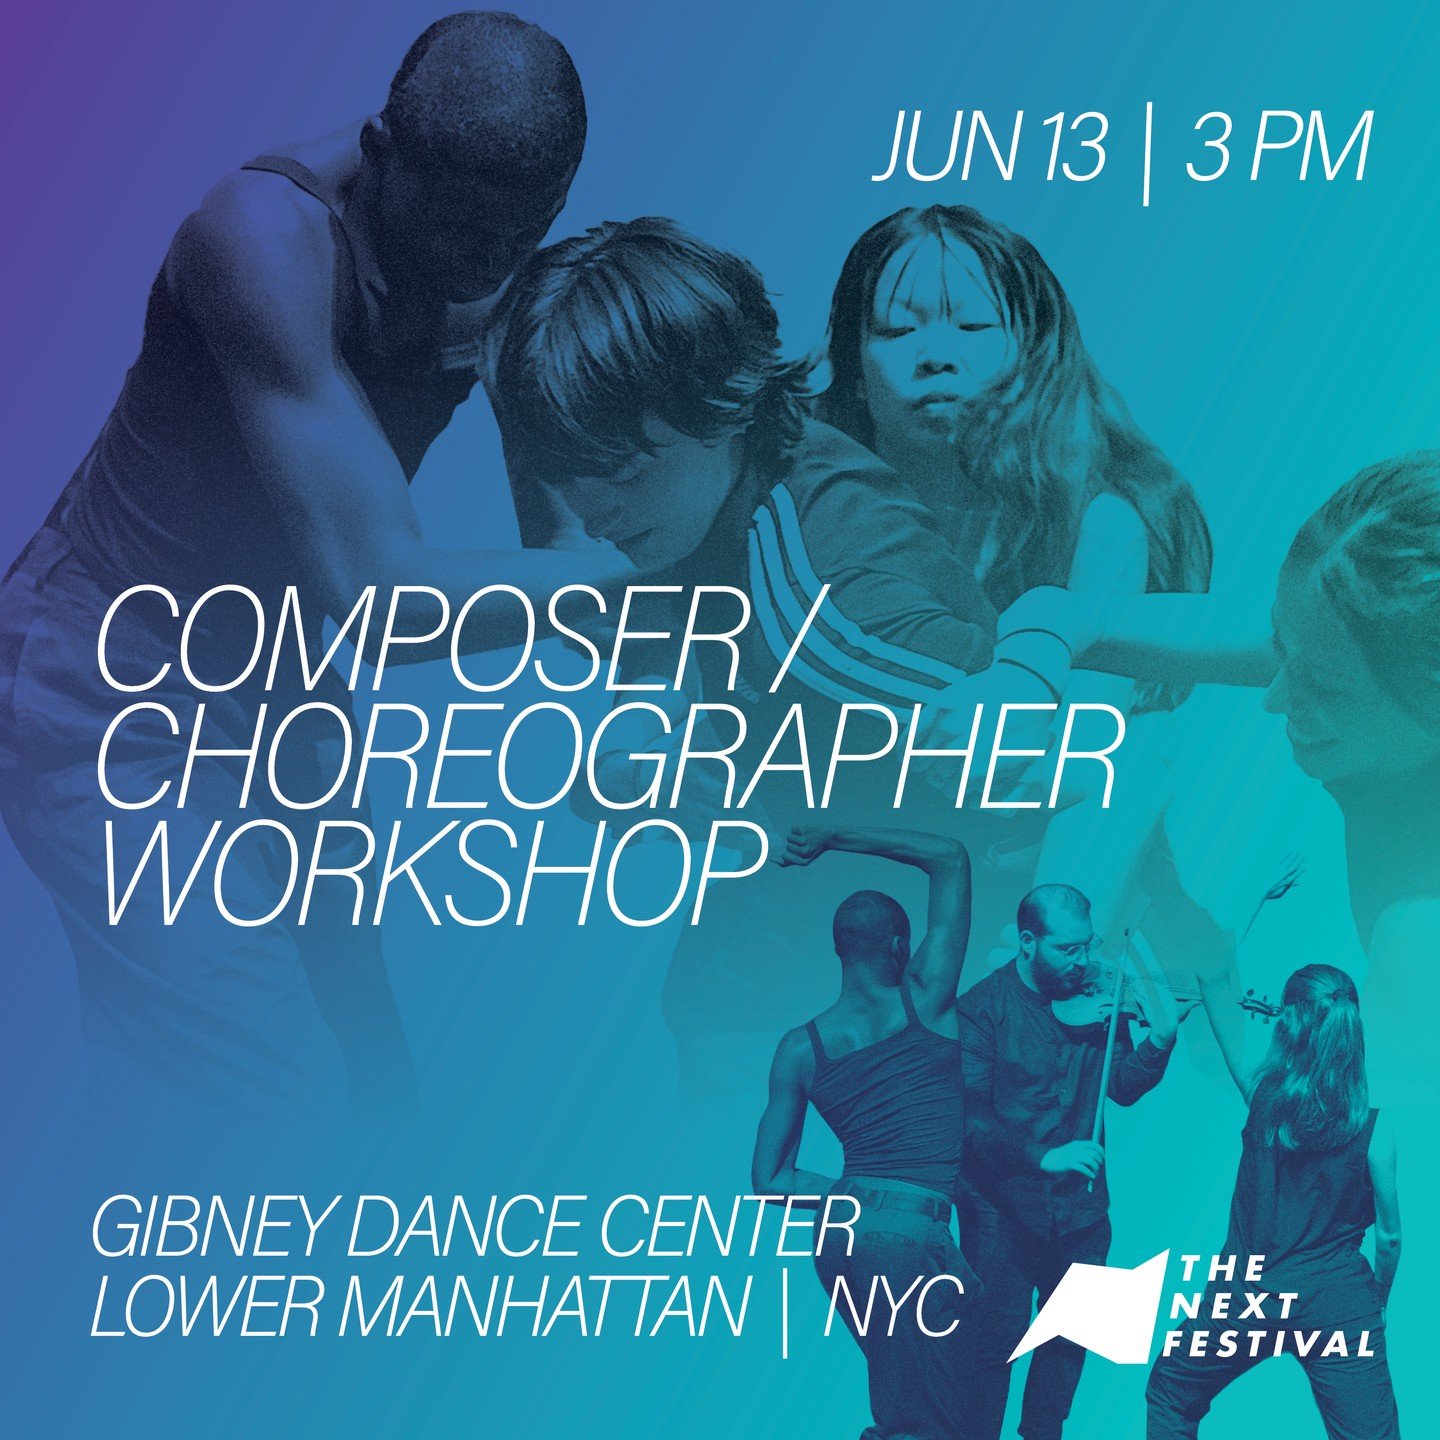 JUNE 13TH! Our 2024 Choreographer, Composer and Performance Fellows premiere new music and dance works in an open showing, after a week of spontaneous creation led by illustrious mentors.

Thursday, June 13 at 3pm
@gibneydance (Lower Manhattan)
Ticke